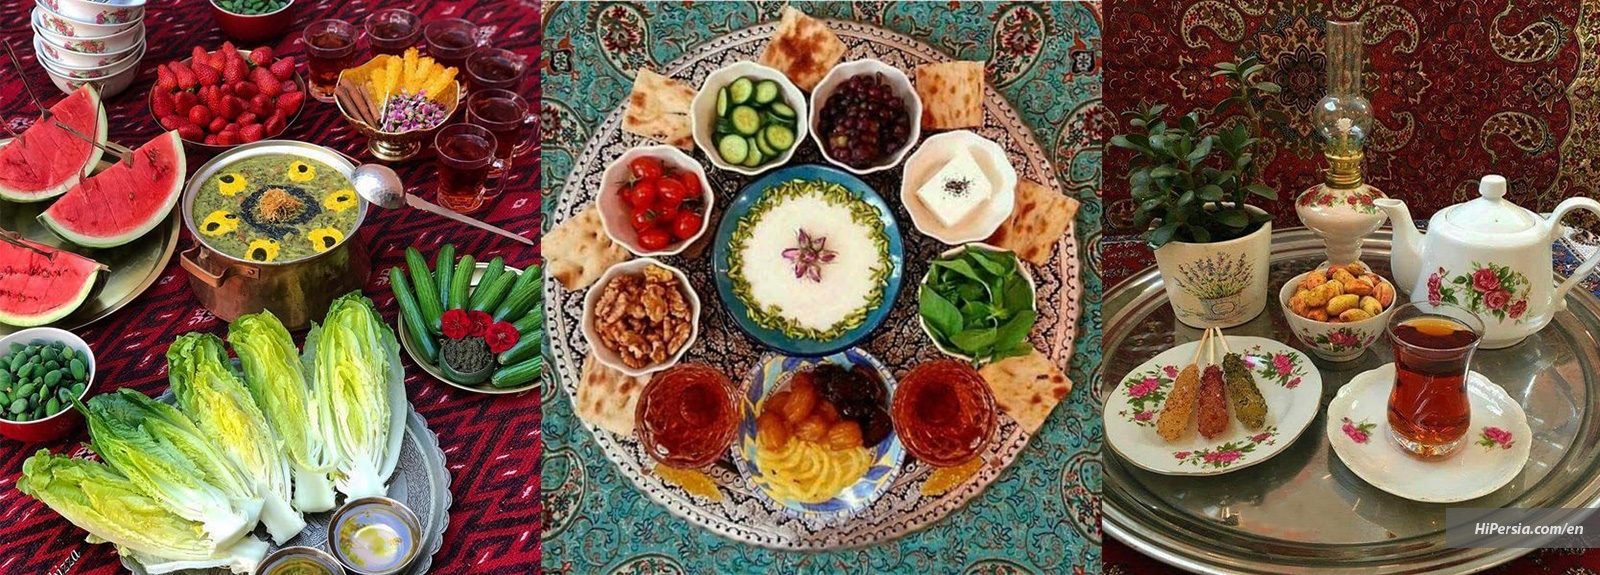 Munchies guide to Tehran